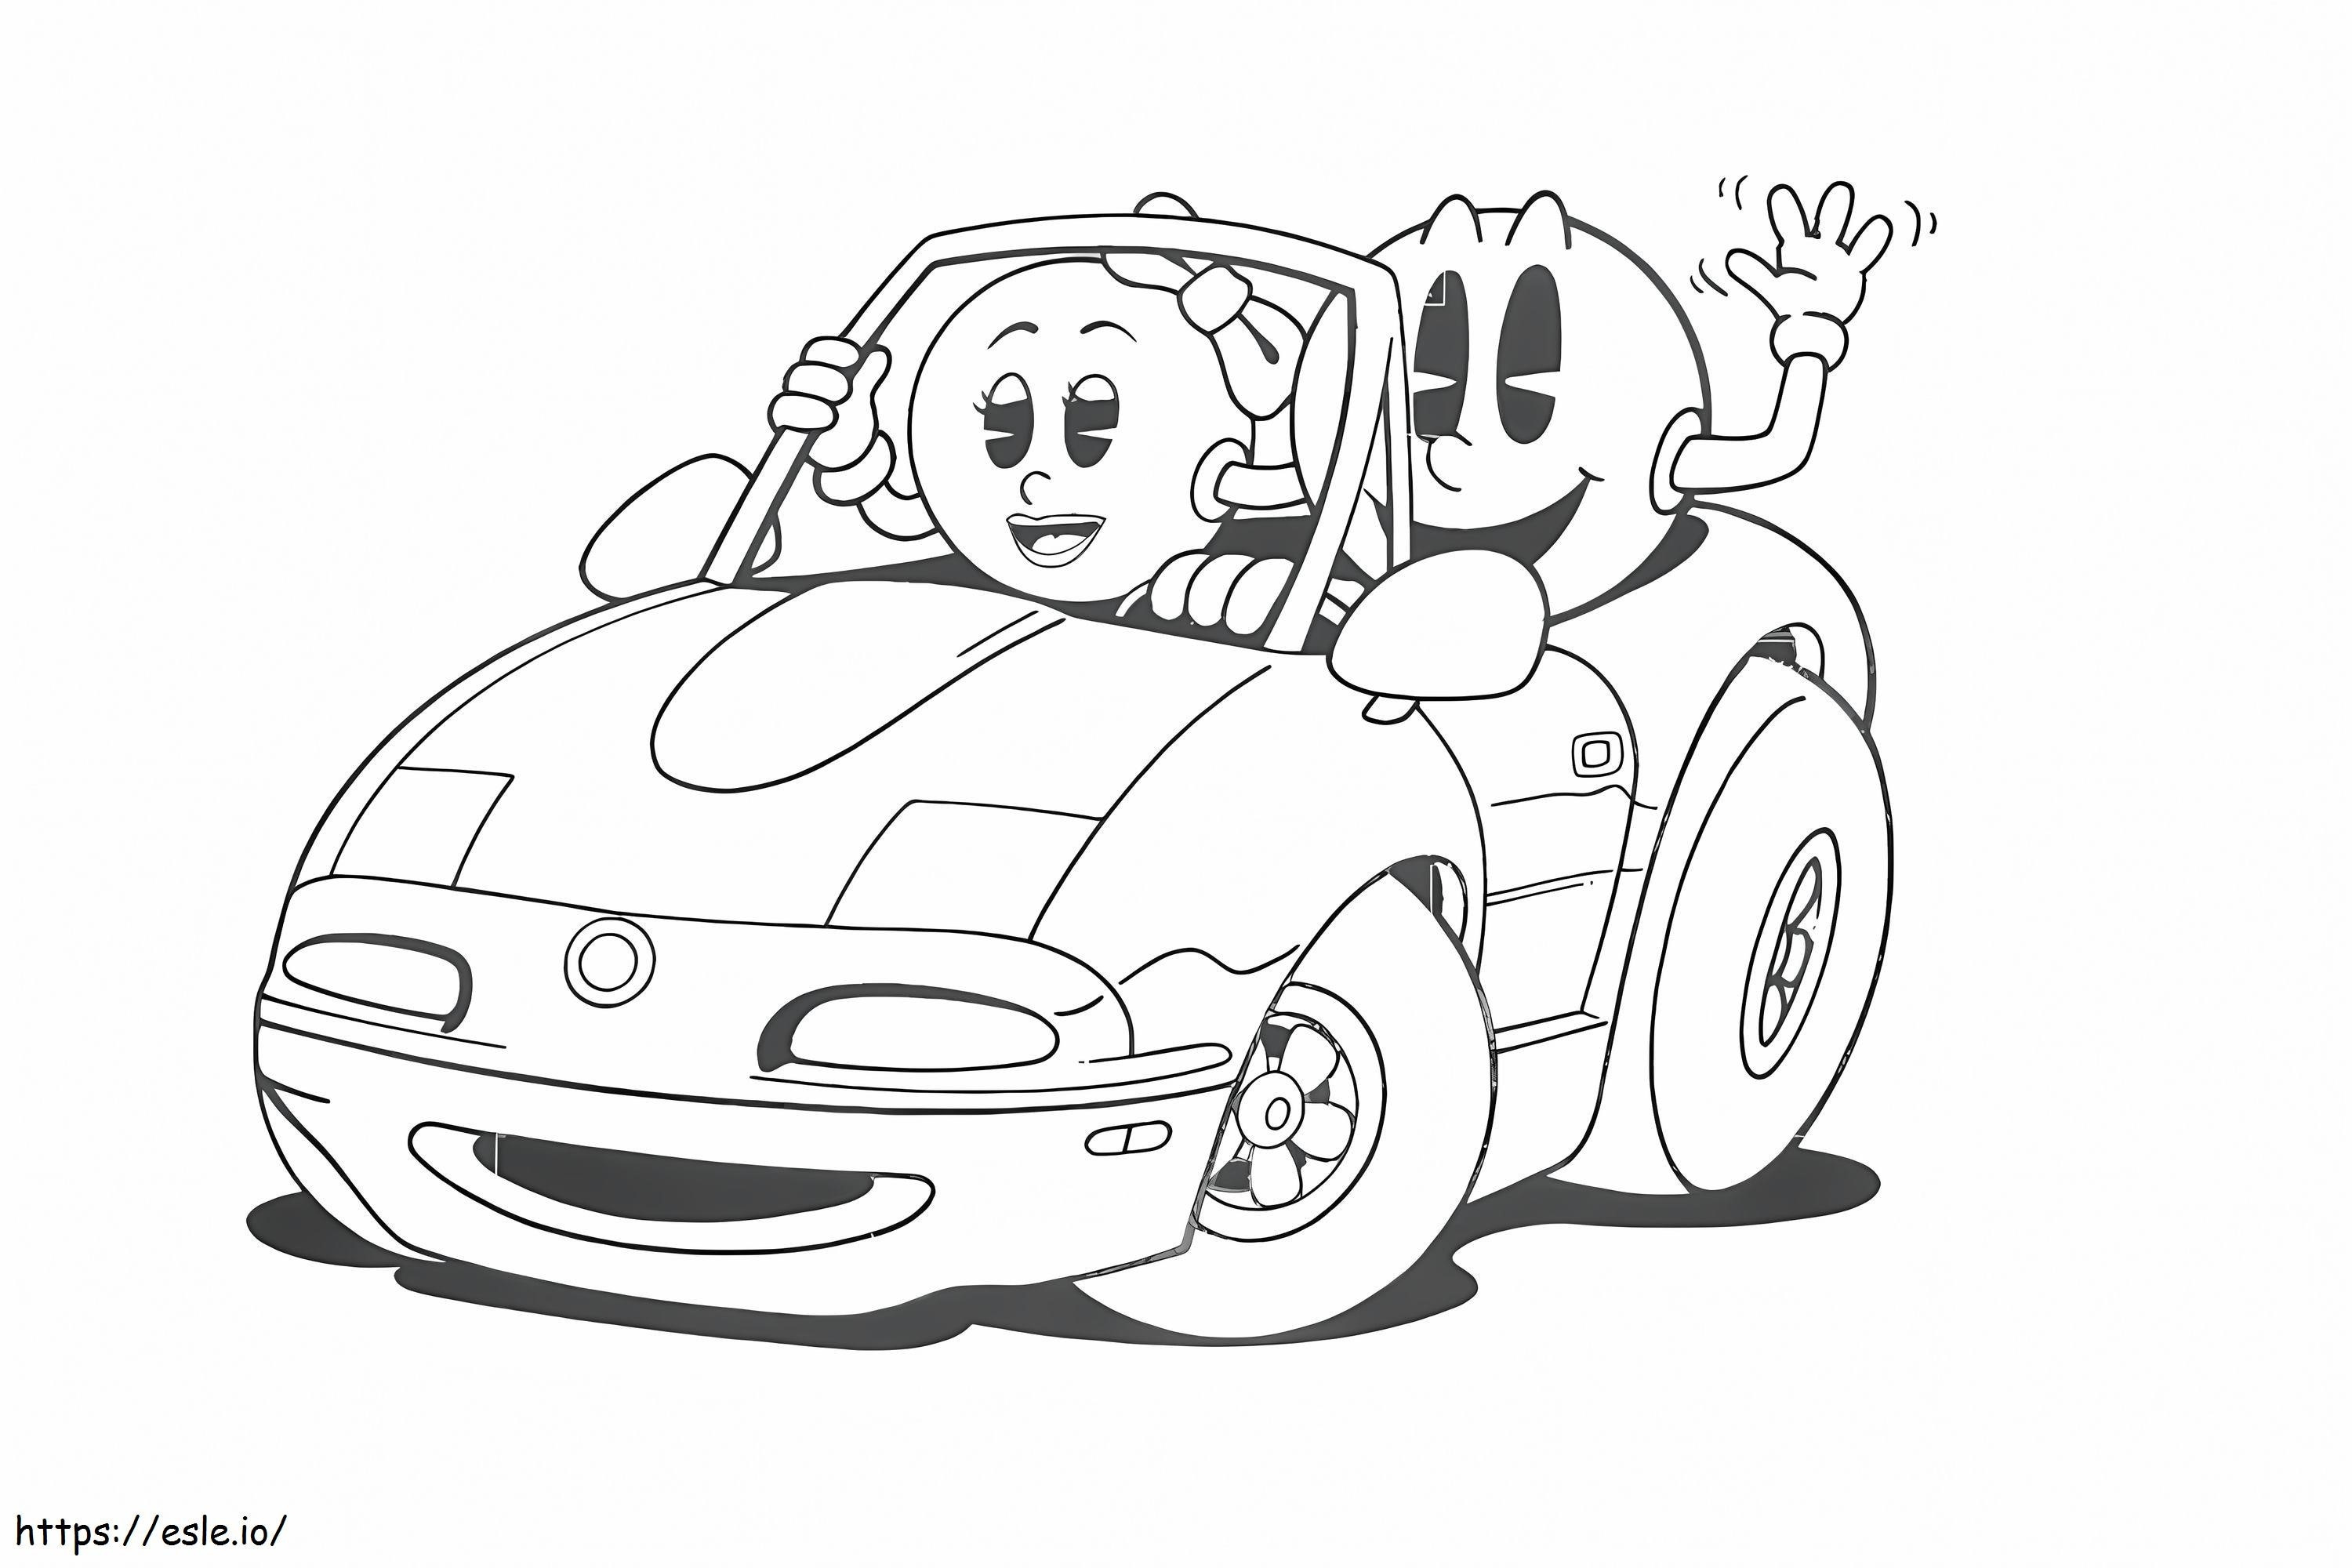 Pacman Driving A Car With MS Pacman coloring page